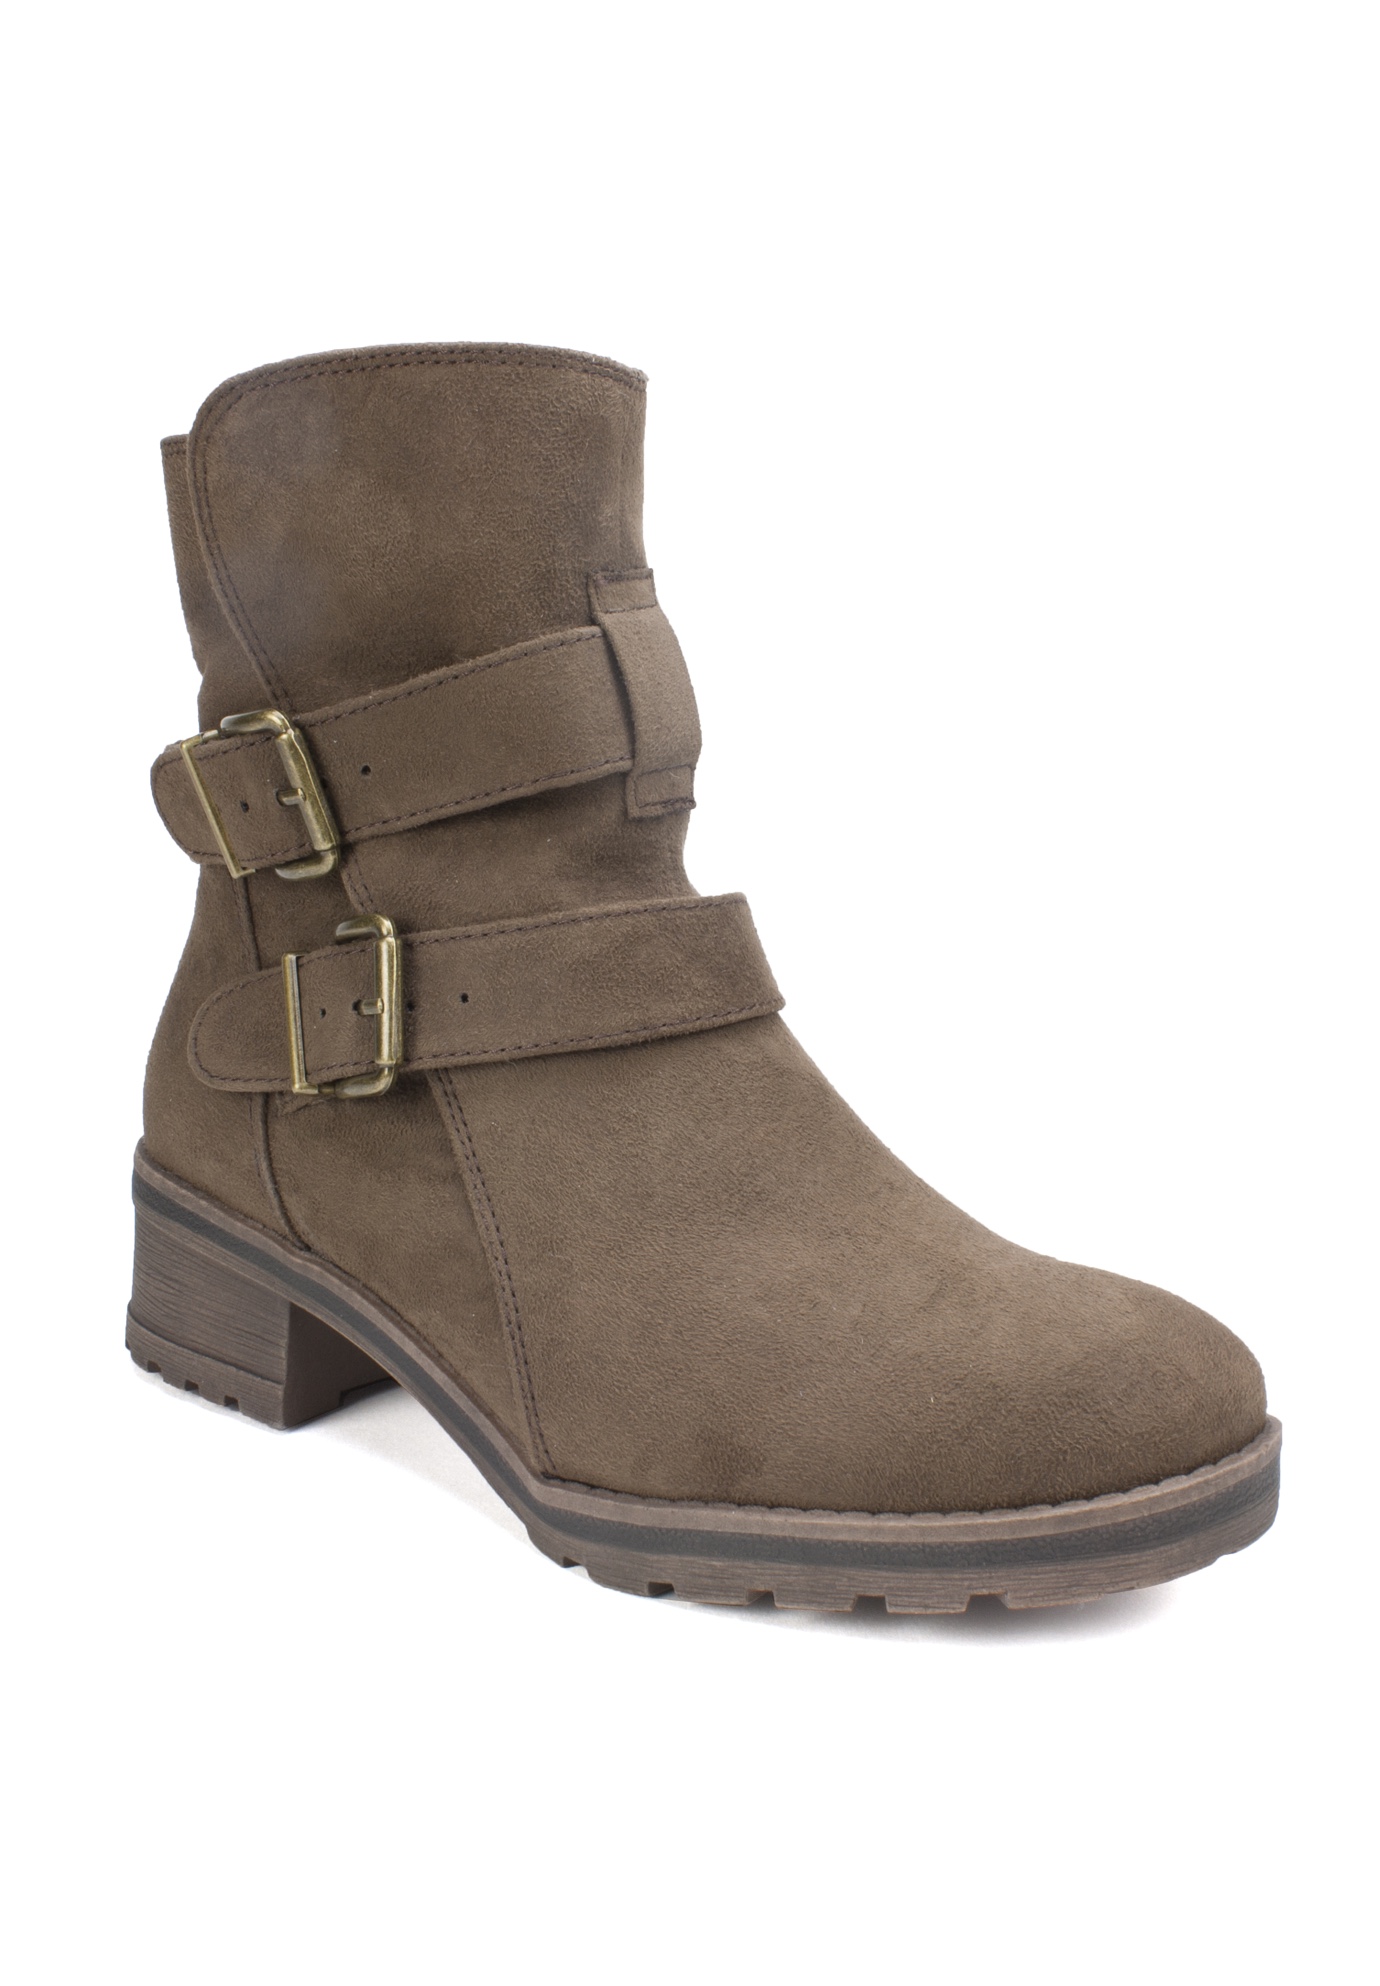 Castity Bootie by White Mountain| Ankle Boots & Booties | Brylane Home